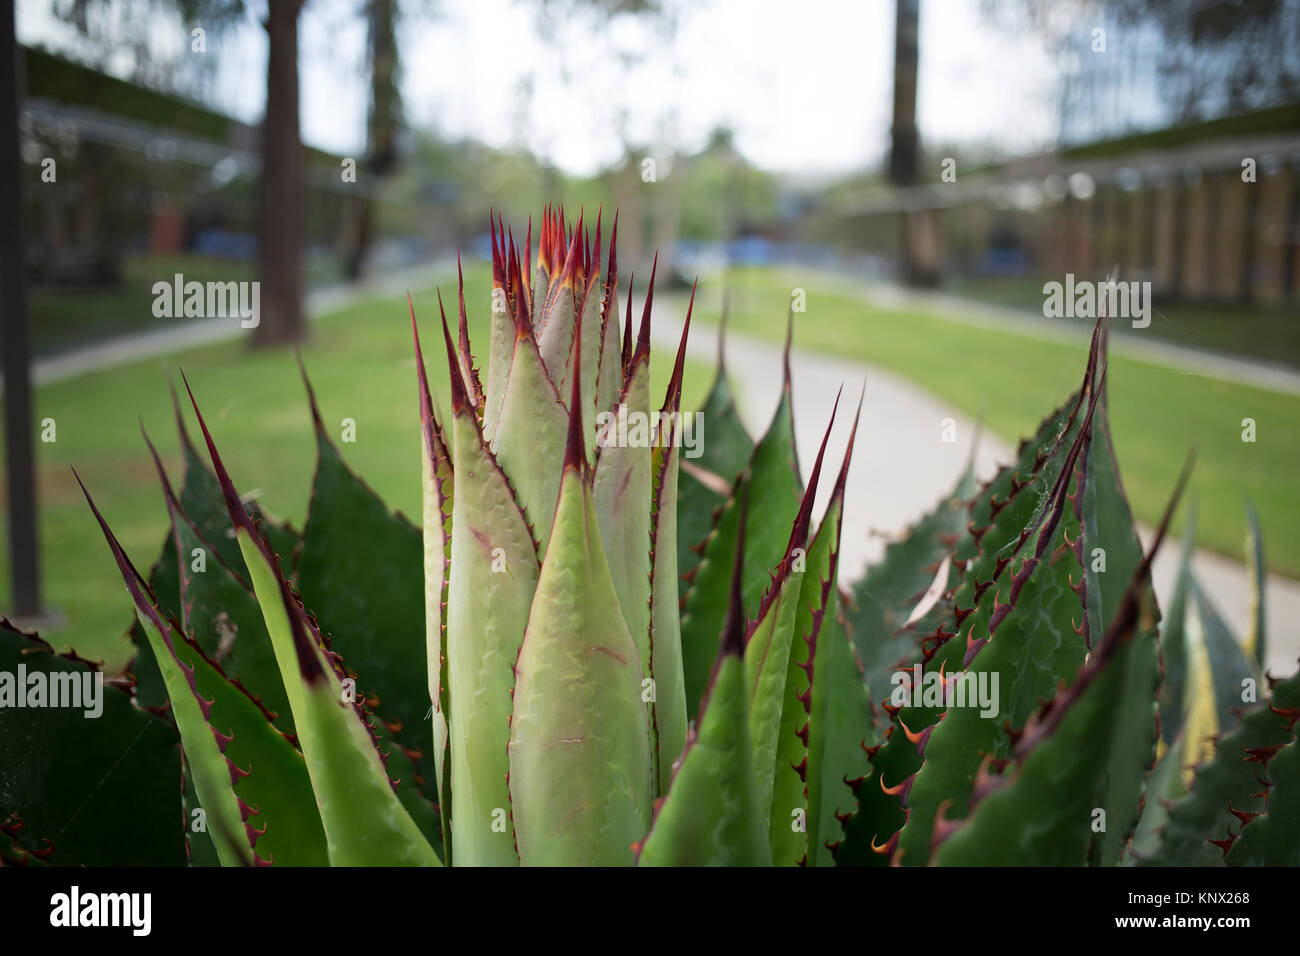 Cactus in the neighborhood against a blur background Stock Photo